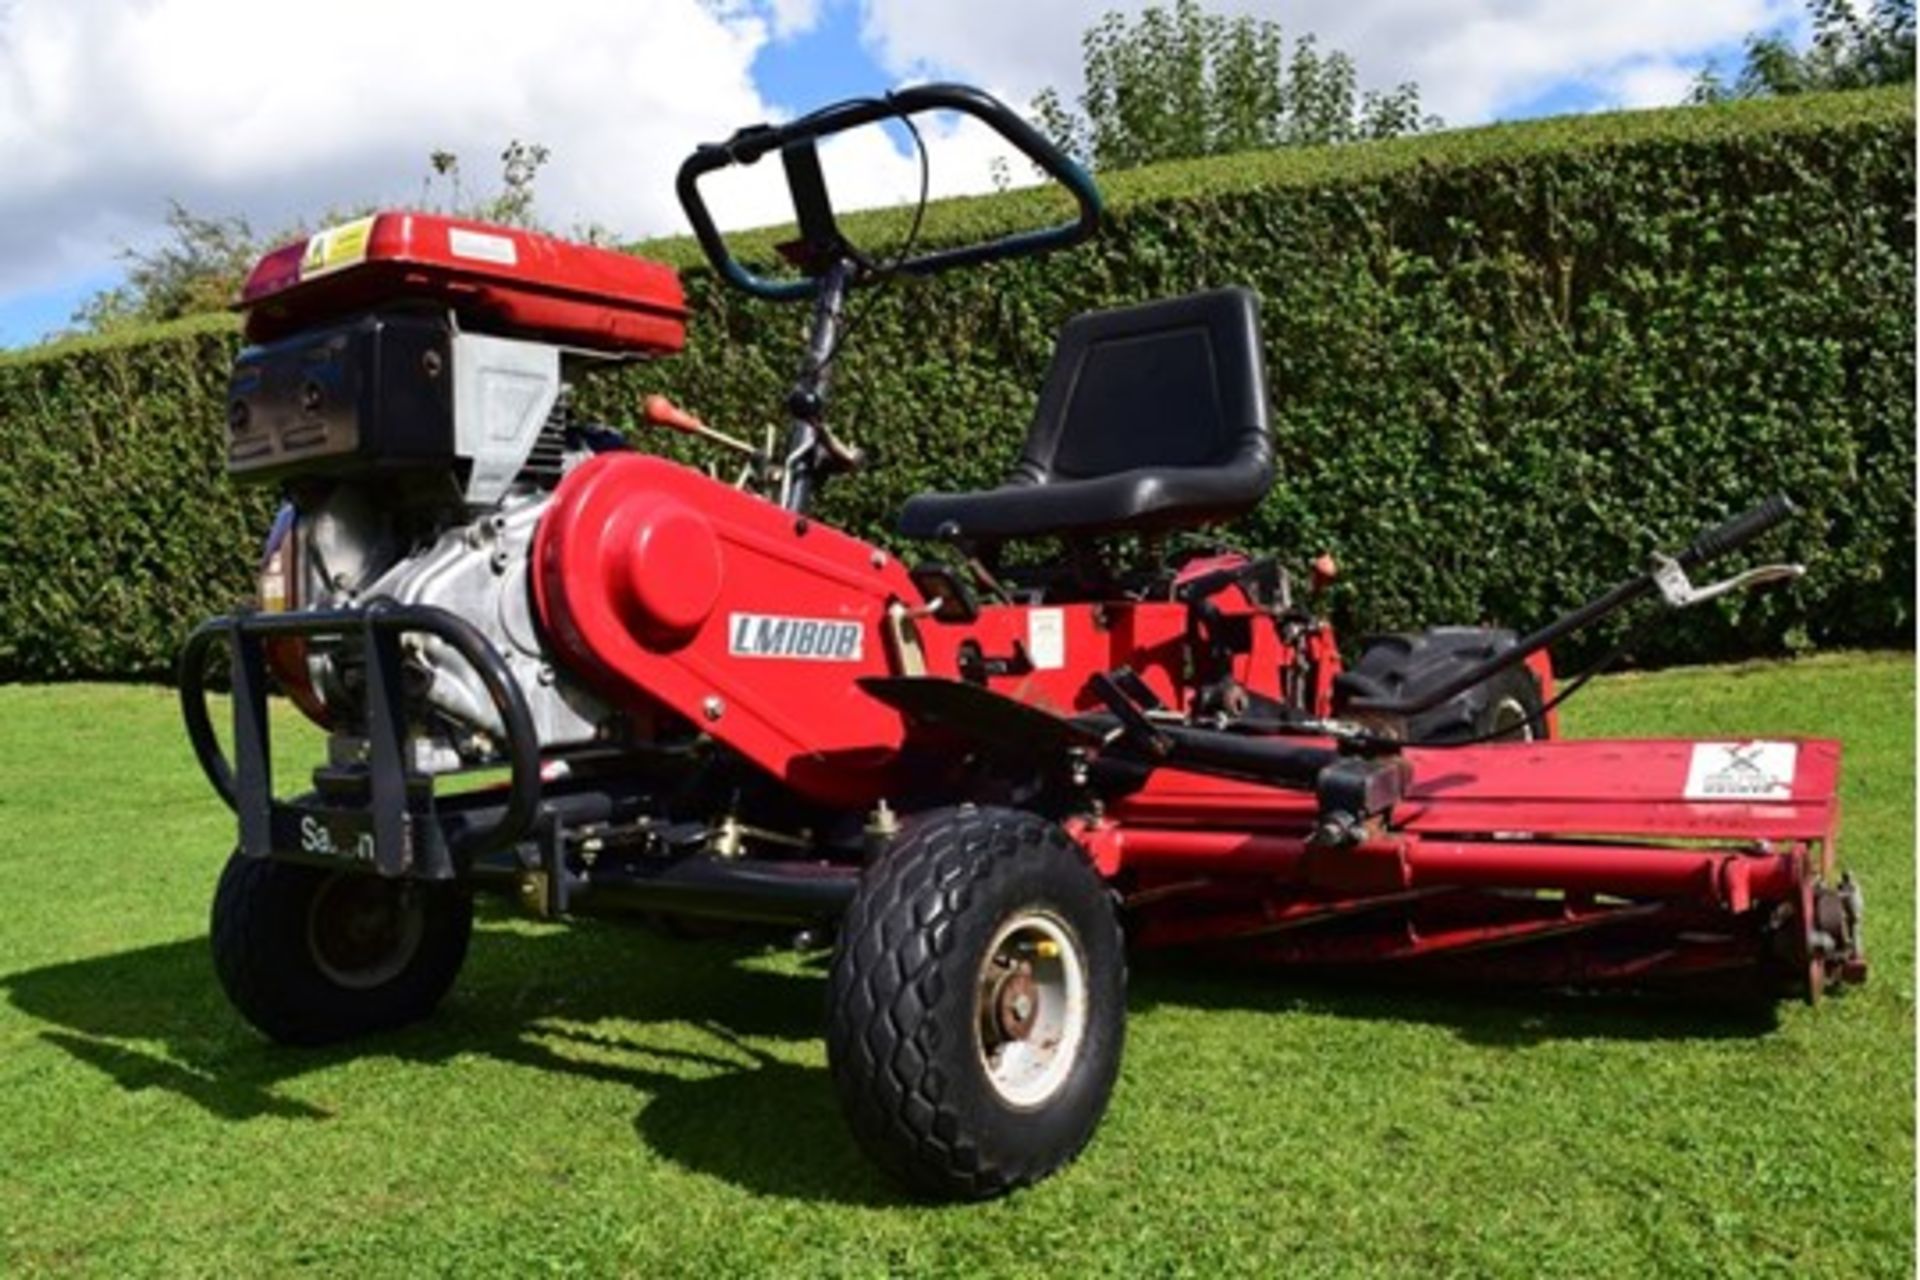 Saxon Triple LM180B Ride On Cylinder Mower - Image 3 of 10